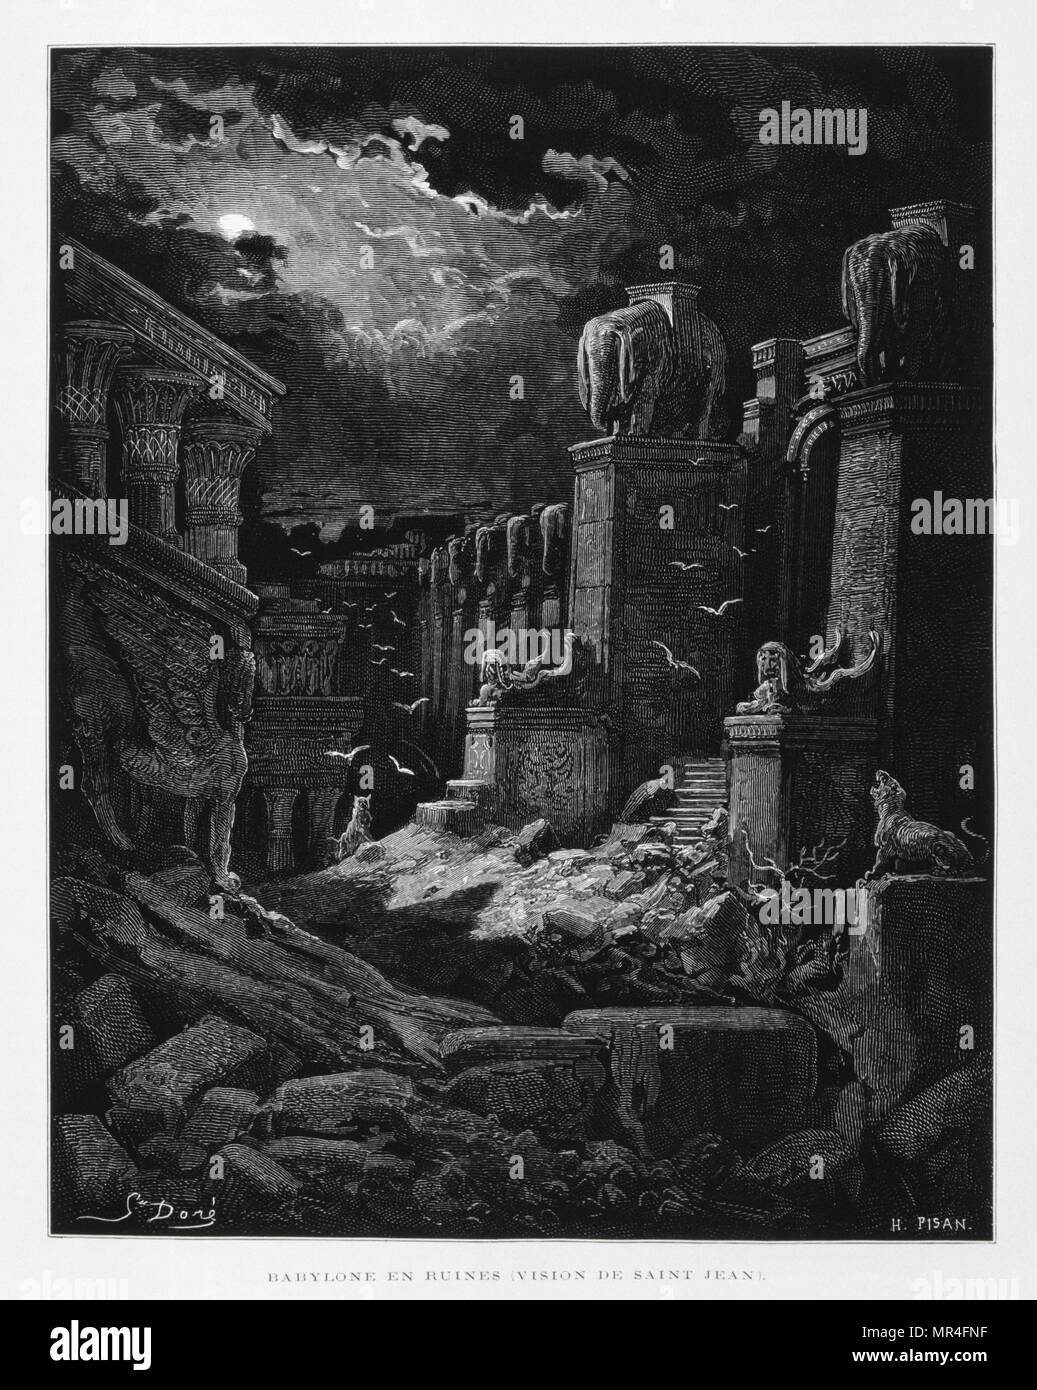 Babylon in Ruins (vision of John the Baptist), Illustration from the Dore Bible 1866. In 1866, the French artist and illustrator Gustave Doré (1832–1883), published a series of 241 wood engravings for a new deluxe edition of the 1843 French translation of the Vulgate Bible, popularly known as the Bible de Tours. This new edition was known as La Grande Bible de Tours and its illustrations were immensely successful. Stock Photo